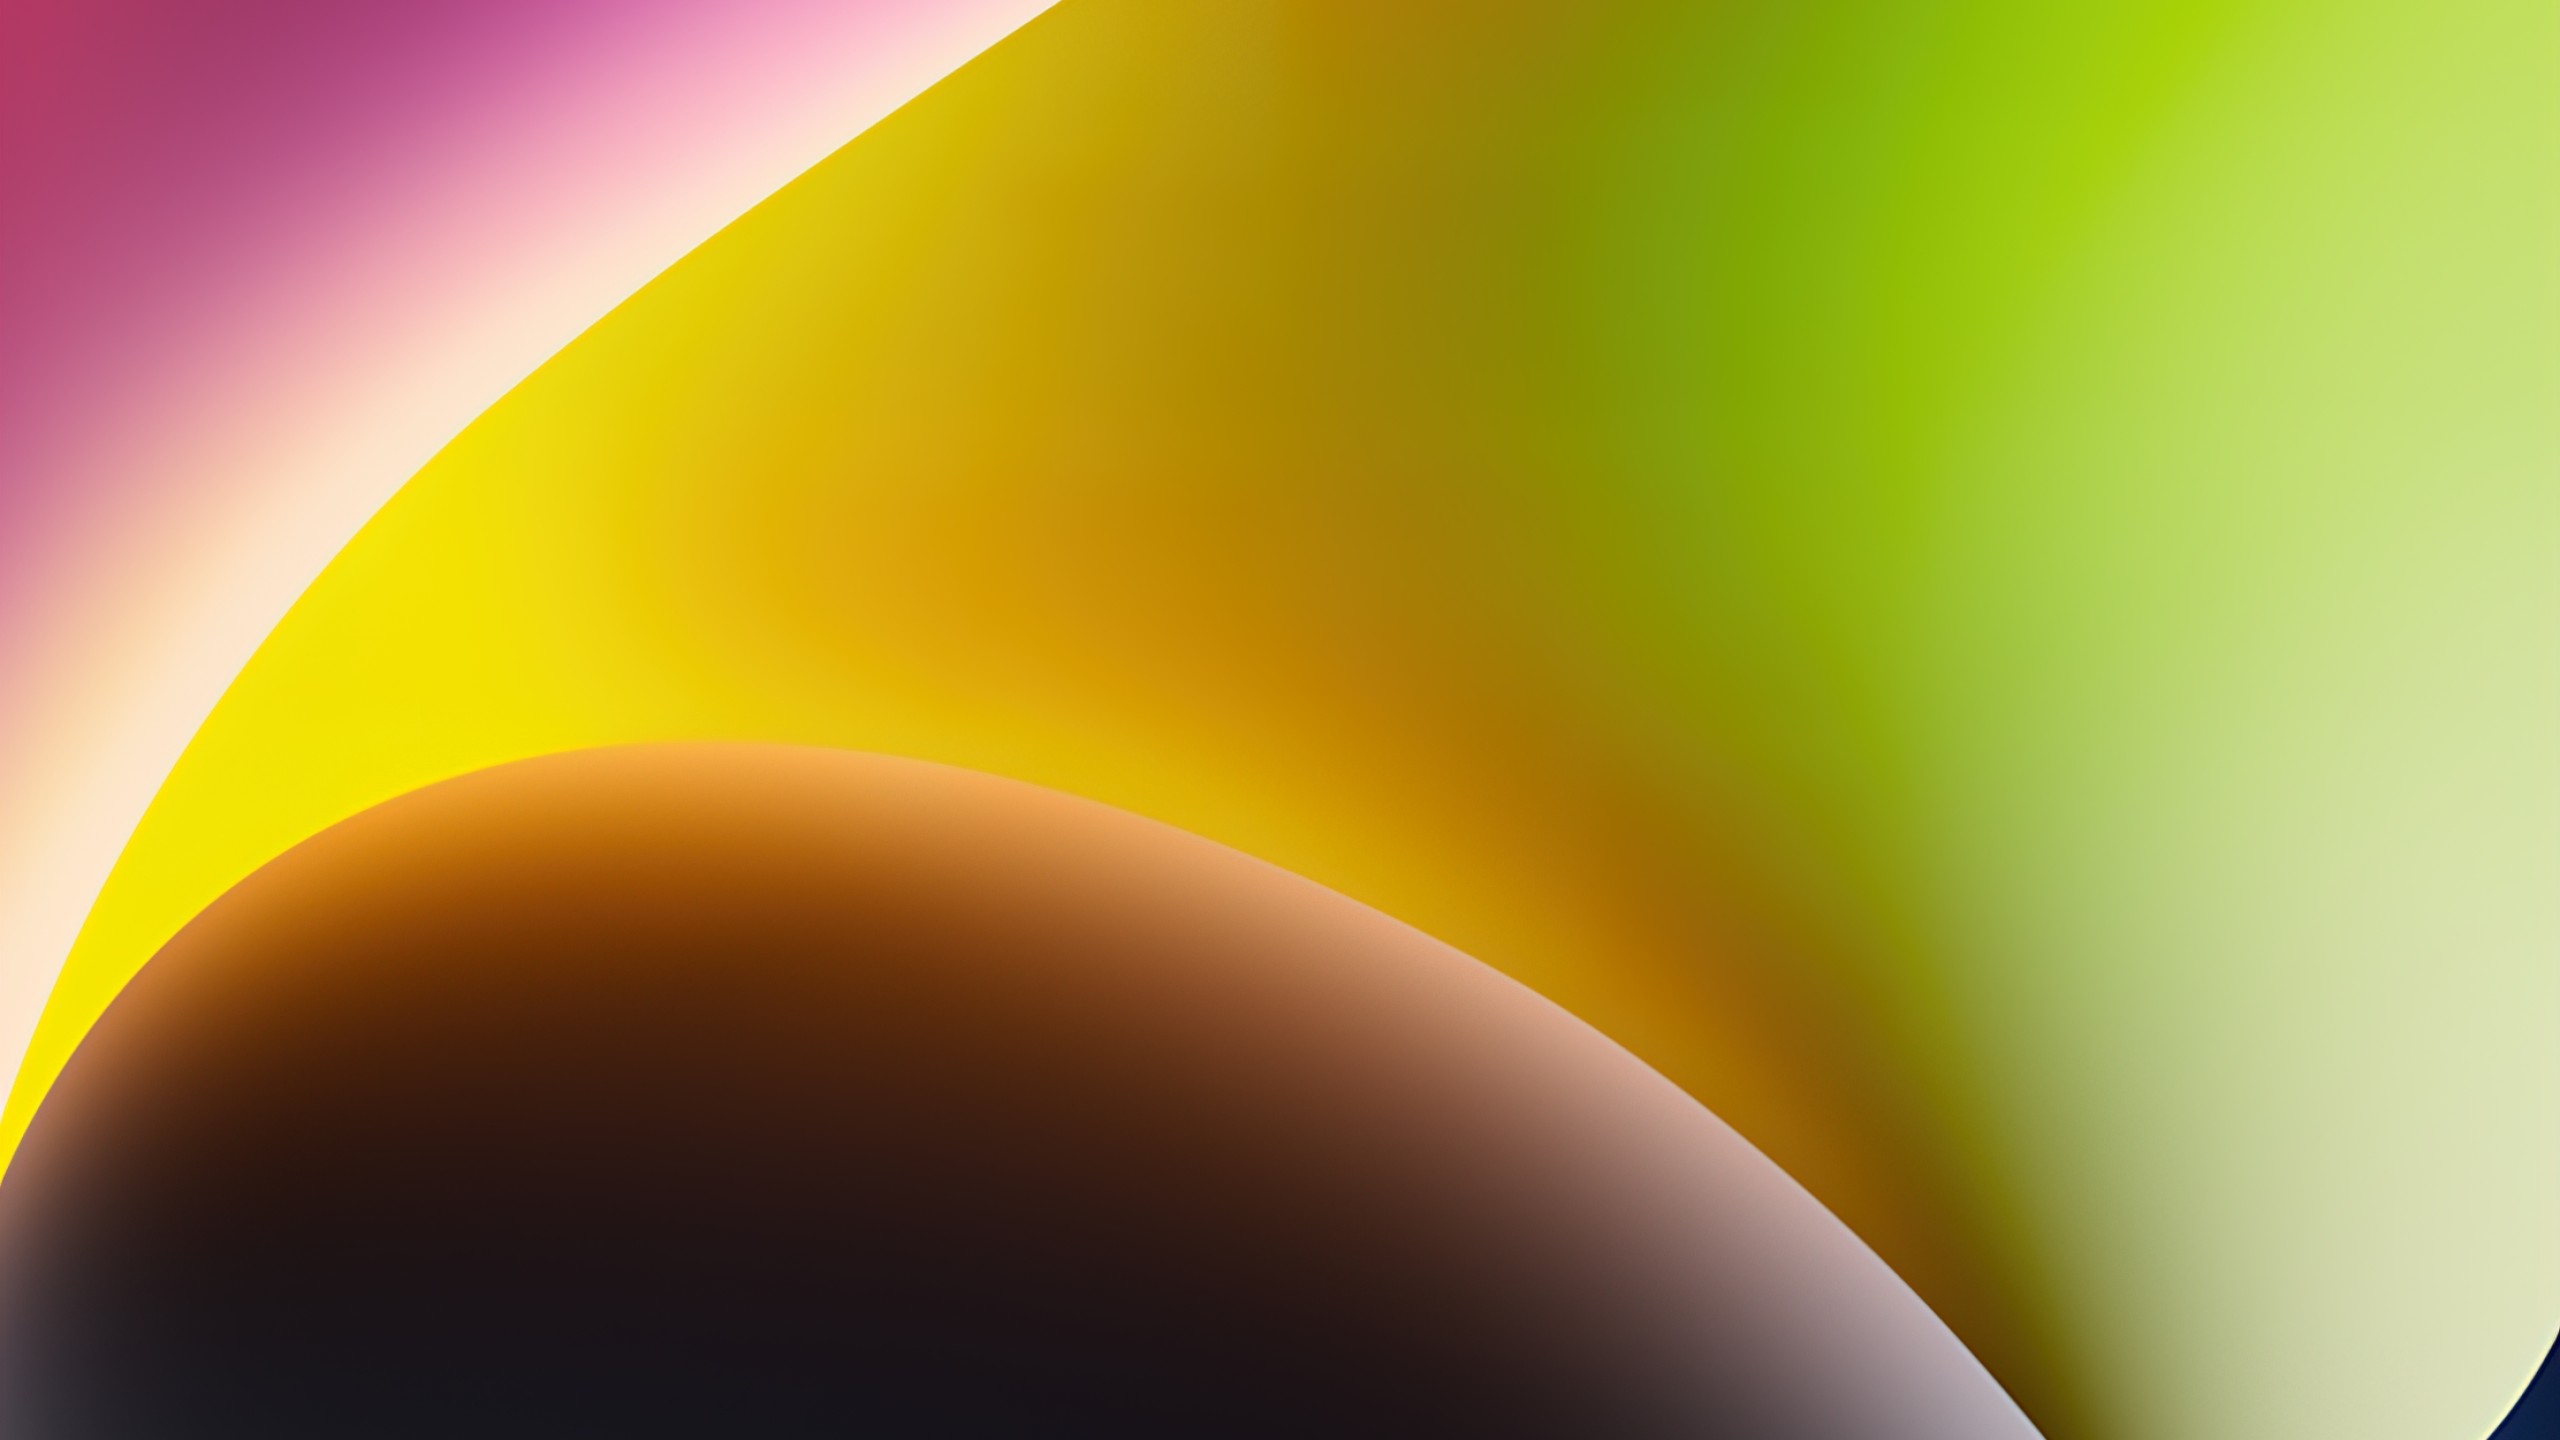 Download: Here are all the new iPhone 14 wallpapers - WebSetNet